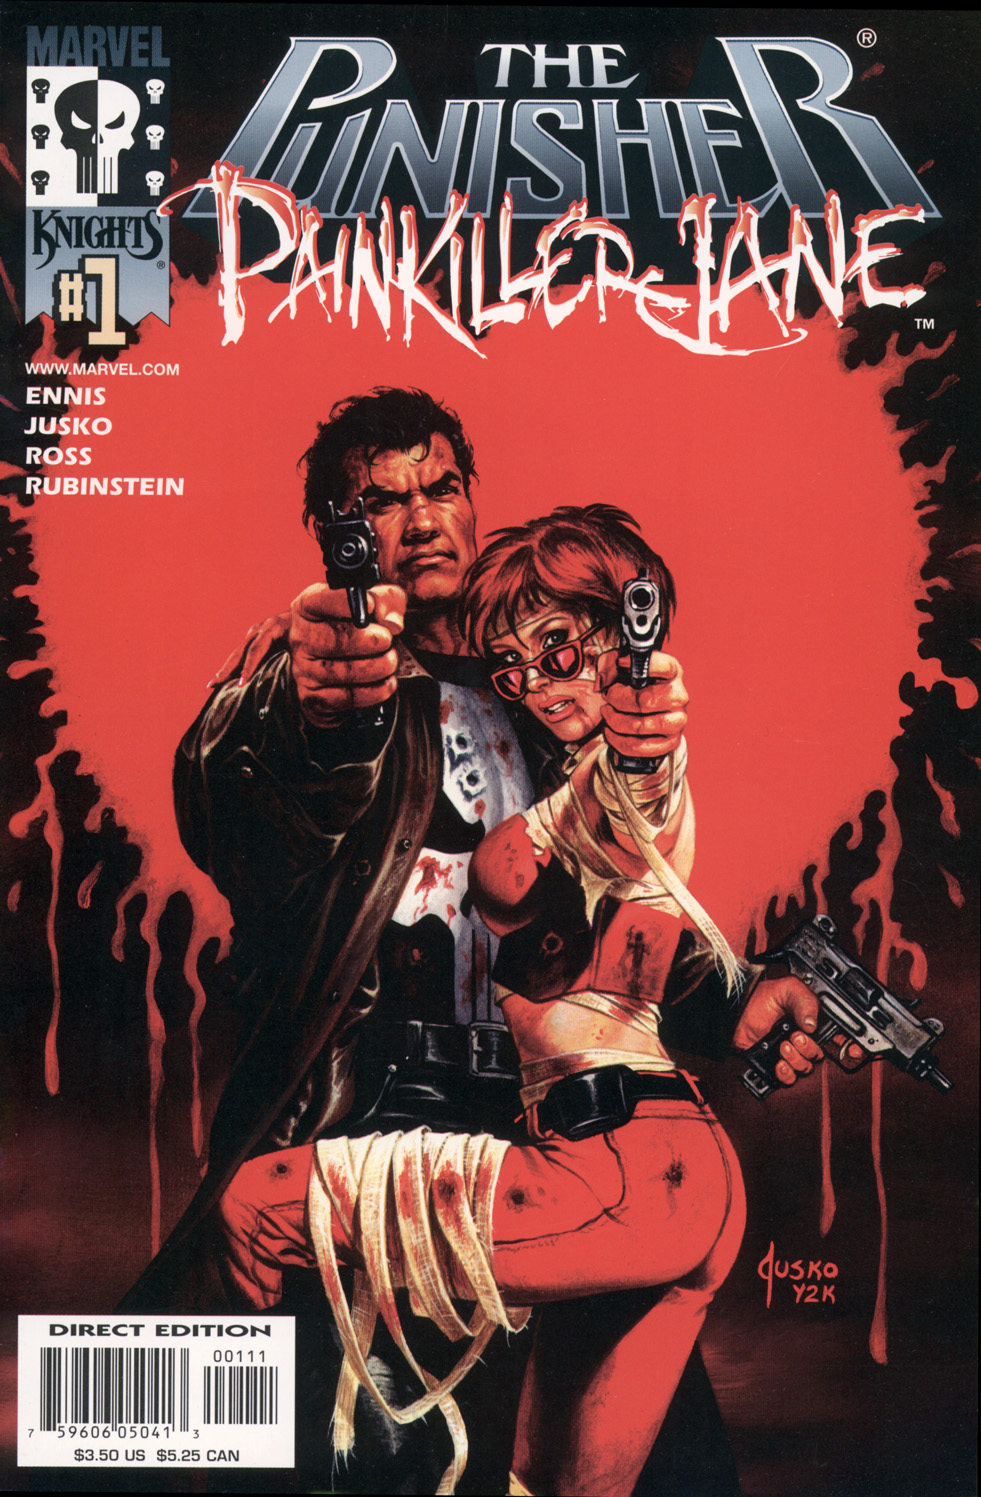 The Punisher and Painkiller Jane 001 Lov